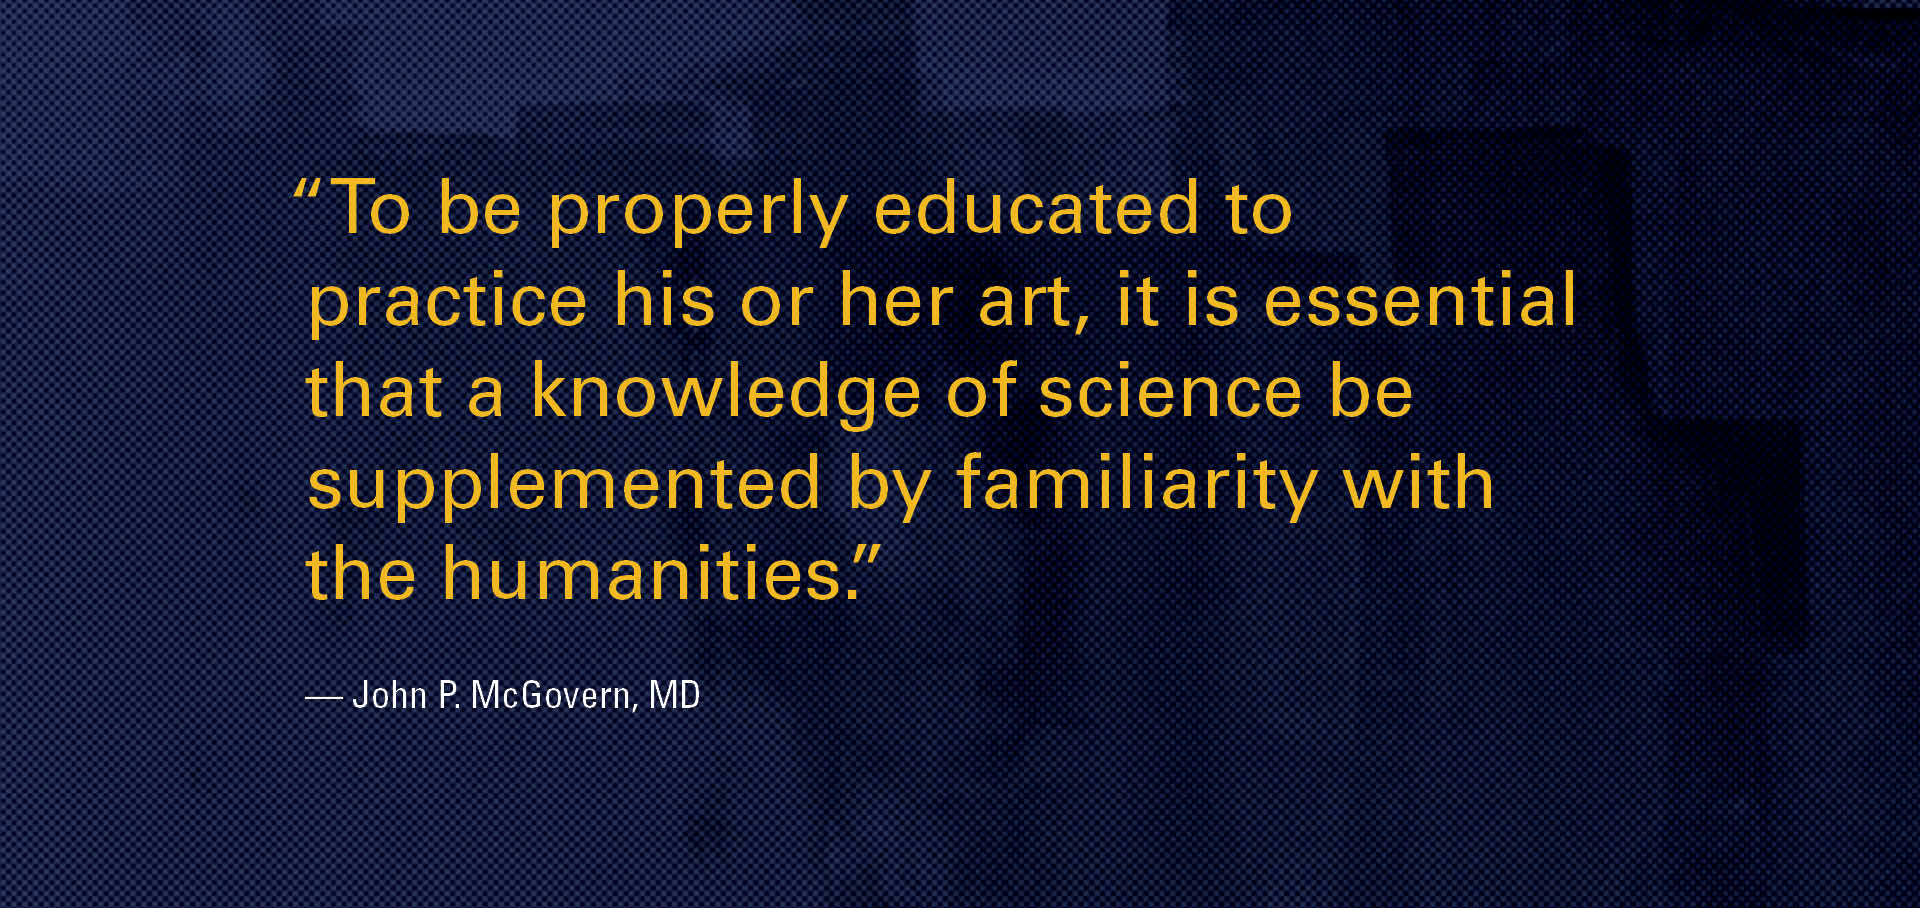 “To be properly educated to practice his or her art, it is essential that a knowledge of science be supplemented by familiarity with the humanities.” — John P. McGovern, MD